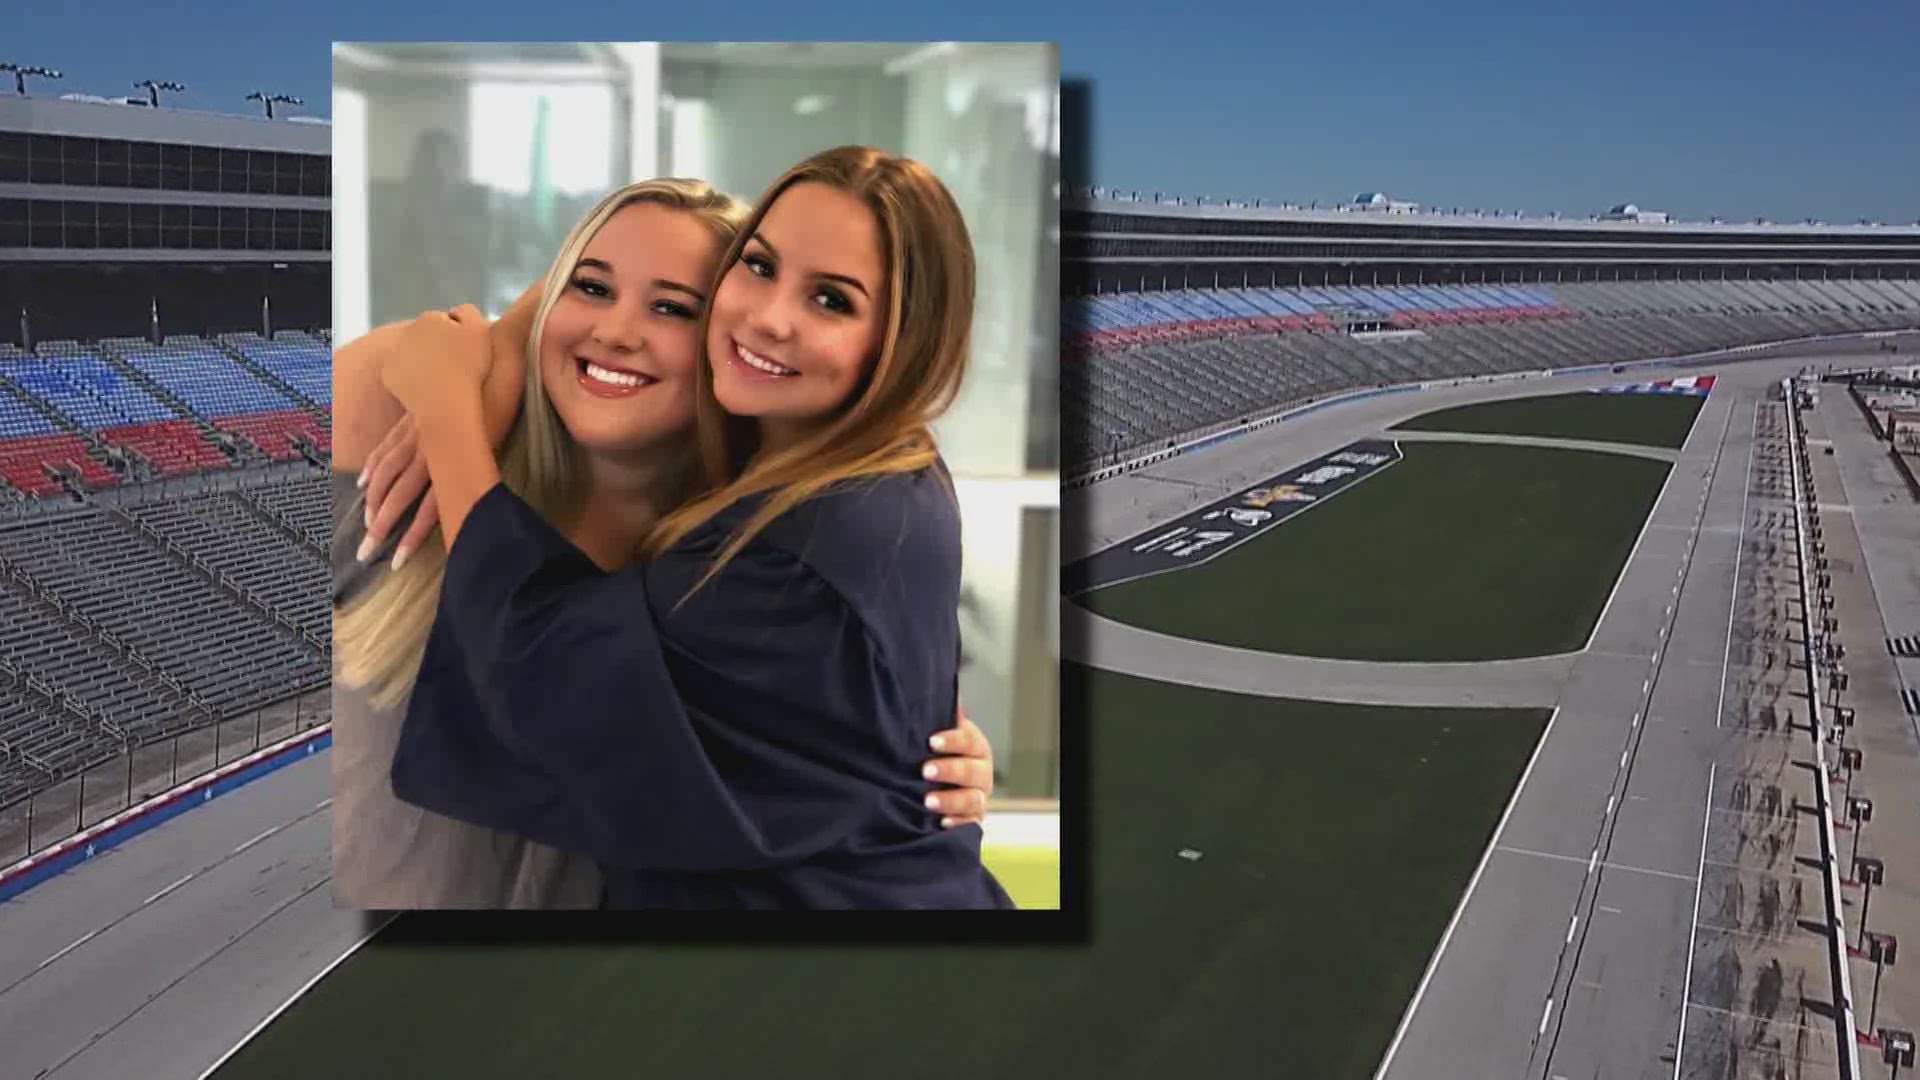 With COVID-19 impacting schools across Texas, all Denton County high schoolers will have their graduation ceremonies at Texas Motor Speedway.